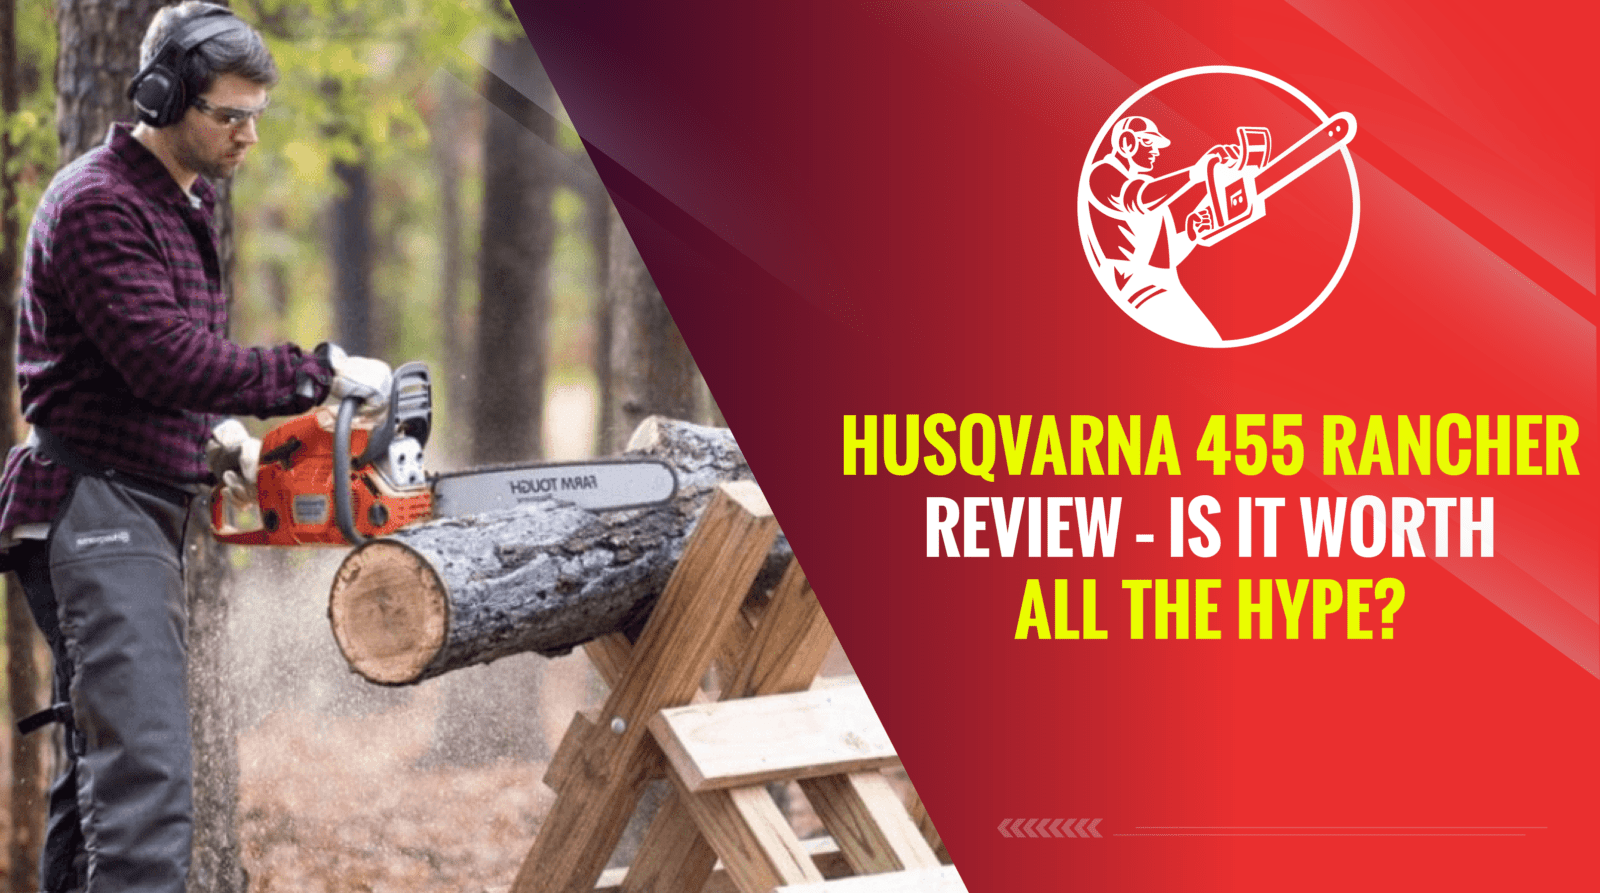 Husqvarna 455 Rancher Review – Is It Worth All the Hype?